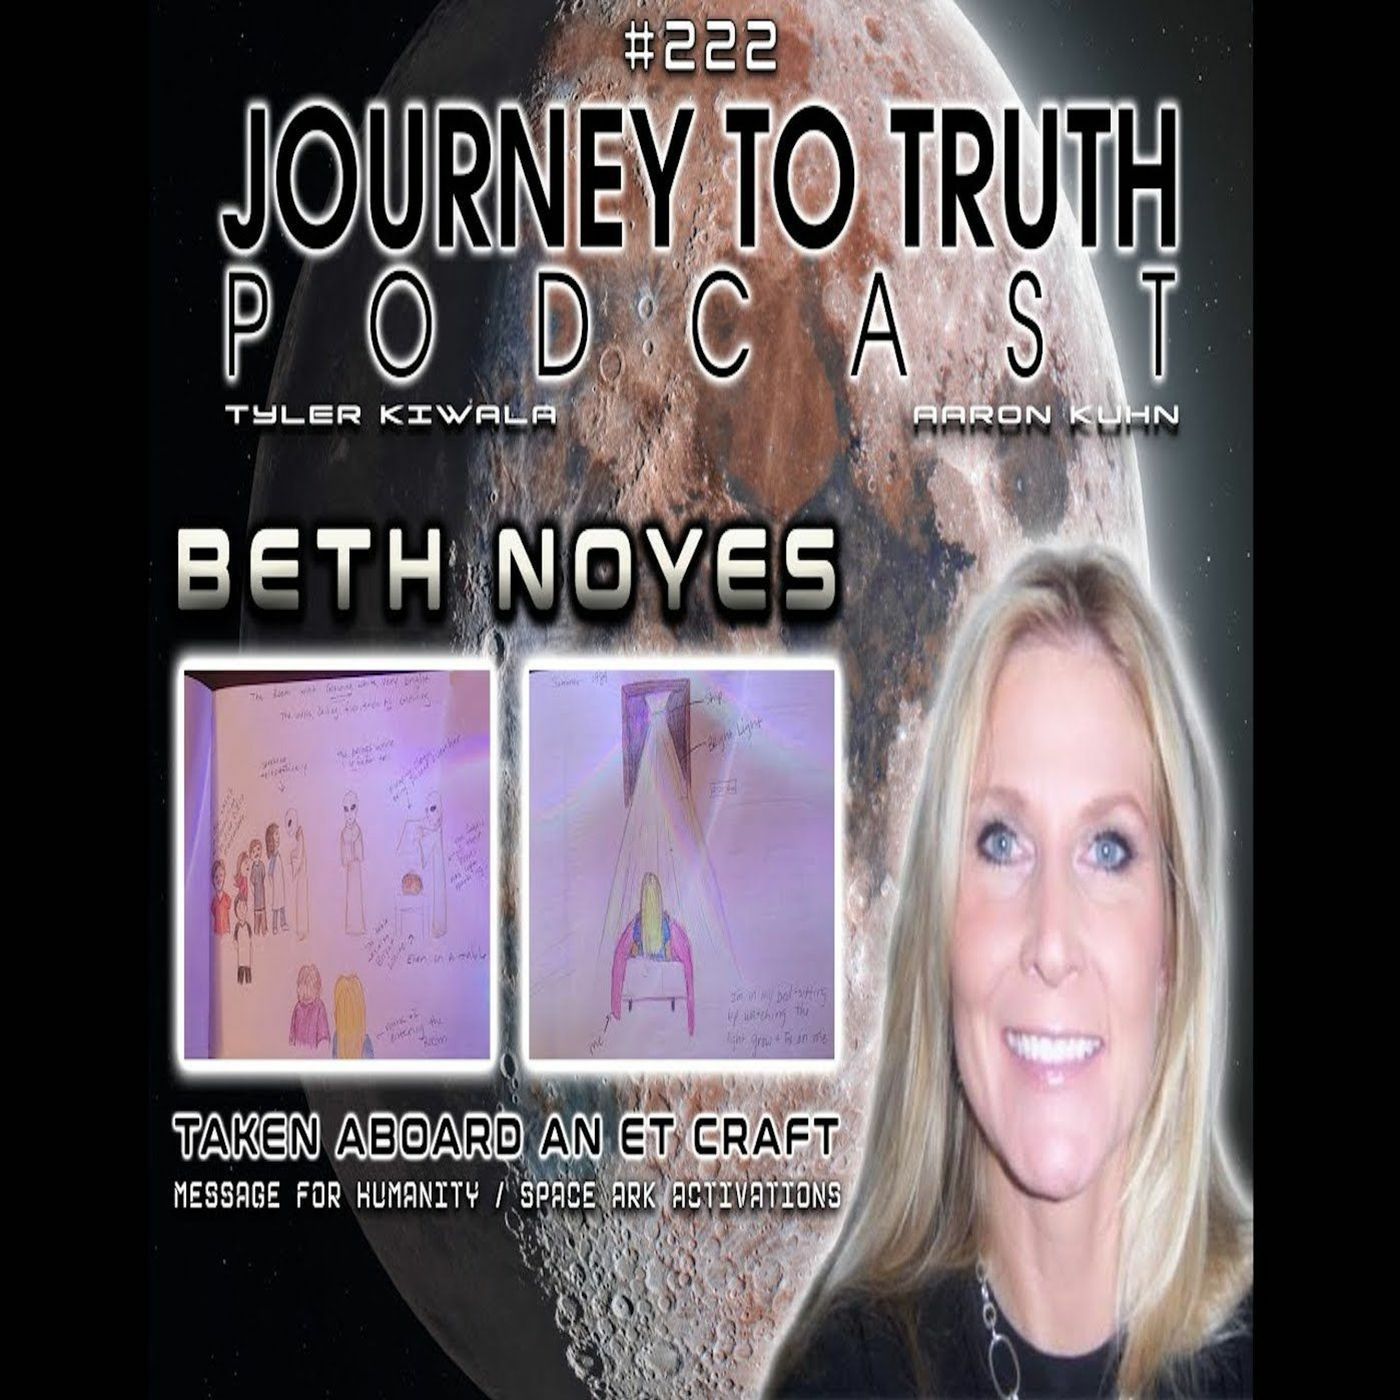 EP 222 - Beth Noyes: Taken Aboard an ET Craft - Message For Humanity - Space Ark Activations